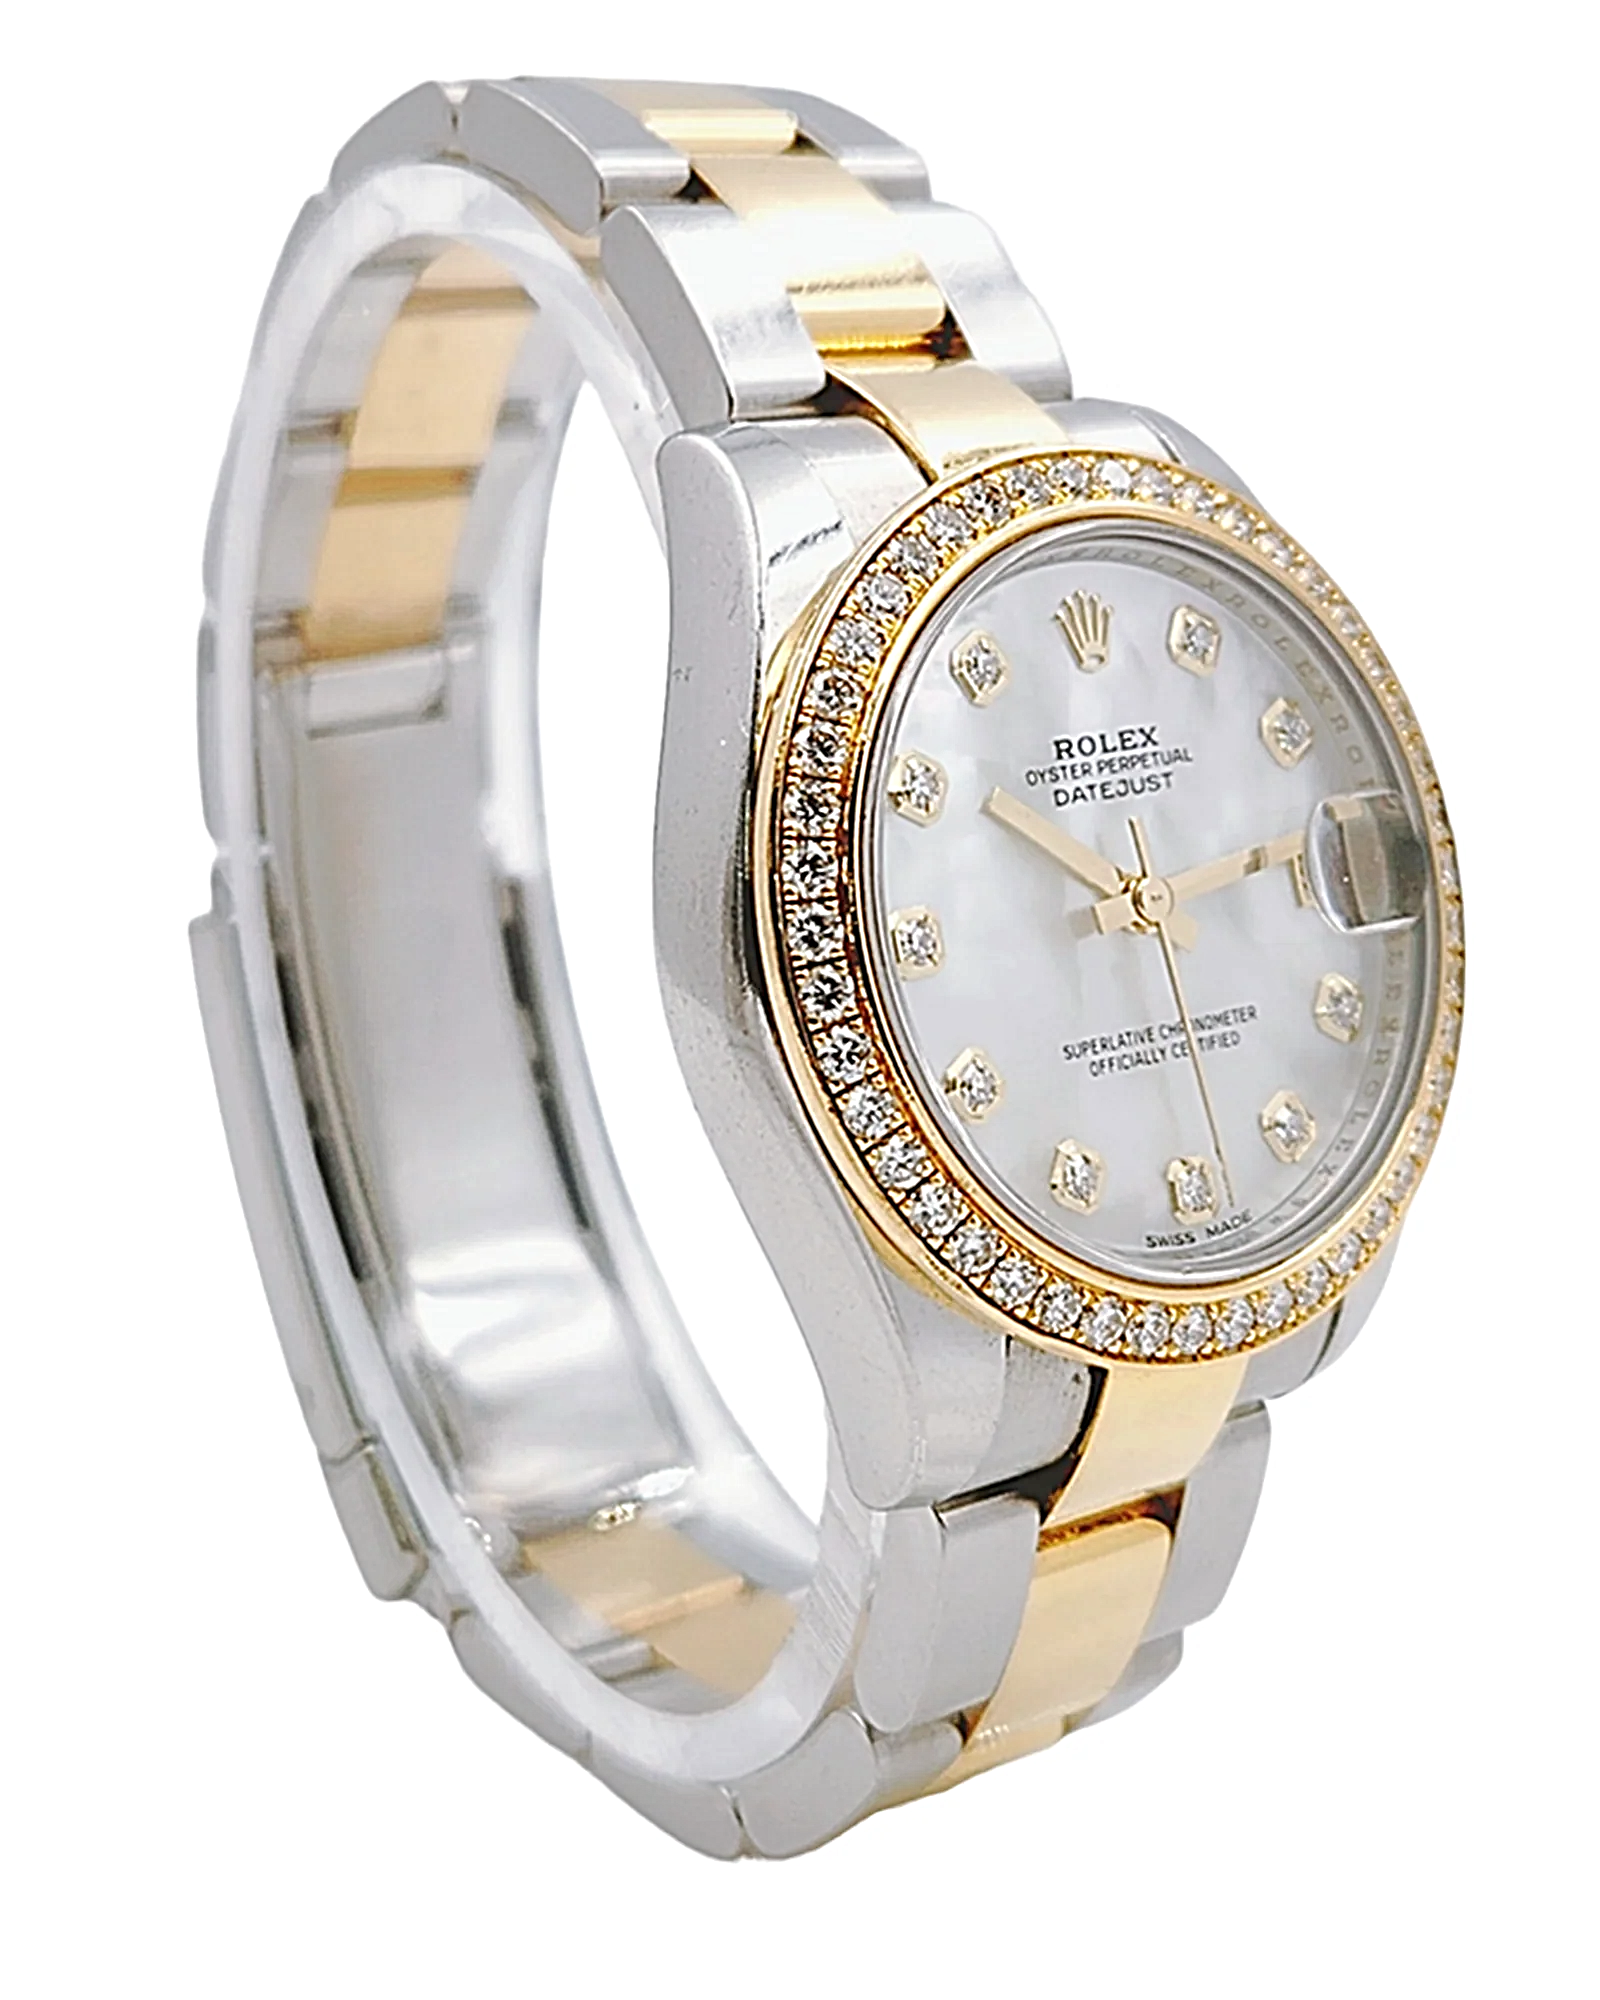 *2018 Ladies Rolex DateJust 31mm Midsize Two Tone 18K Yellow Gold / Stainless Steel Watch with Mother of Pearl Diamond Dial and Diamond Bezel. (Pre-Owned 178383)